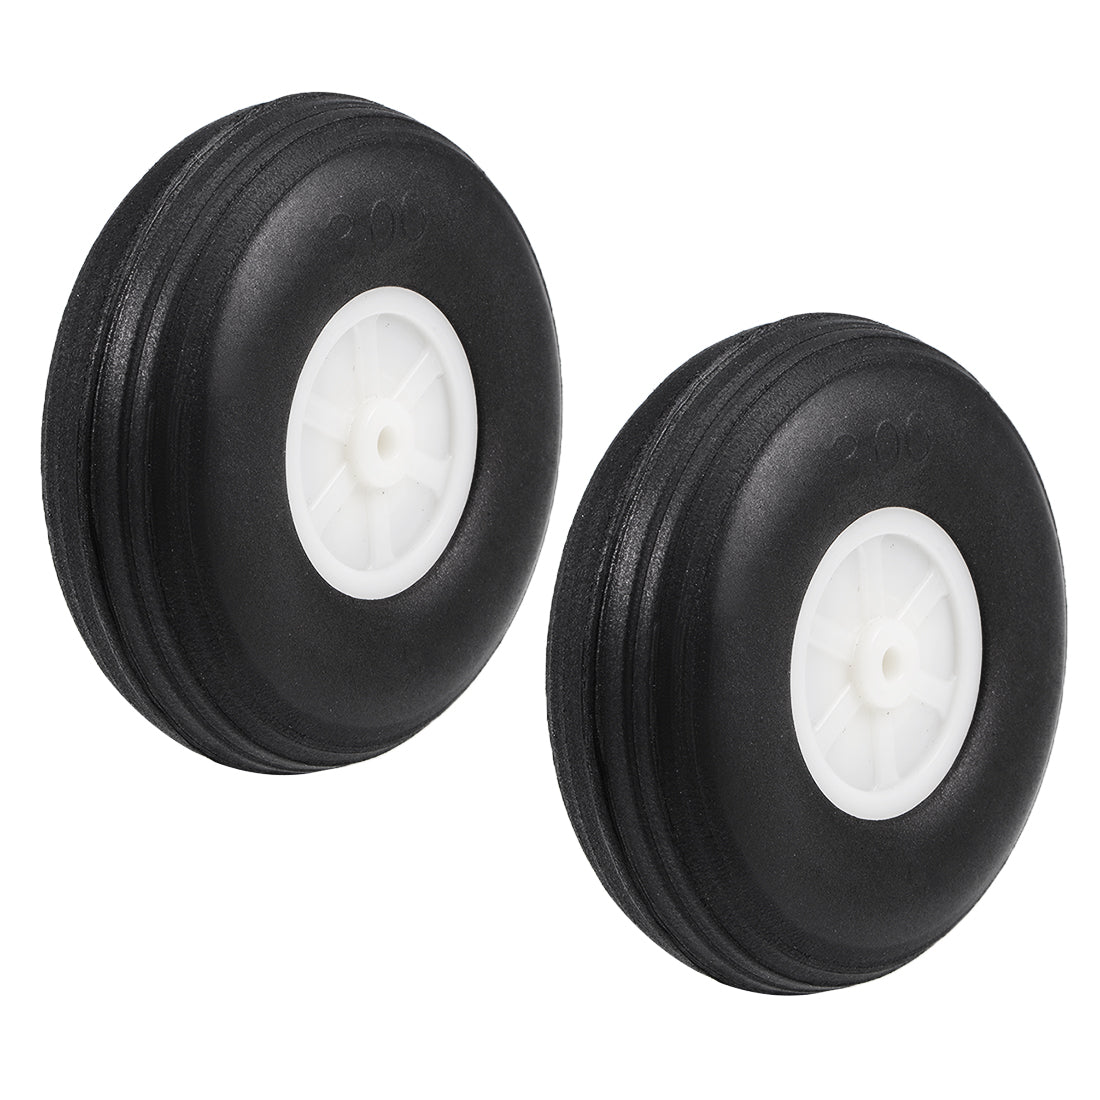 uxcell Uxcell Tire and Wheel Sets for RC Car Airplane,PU Sponge Tire with Plastic Hub,3" 2pcs